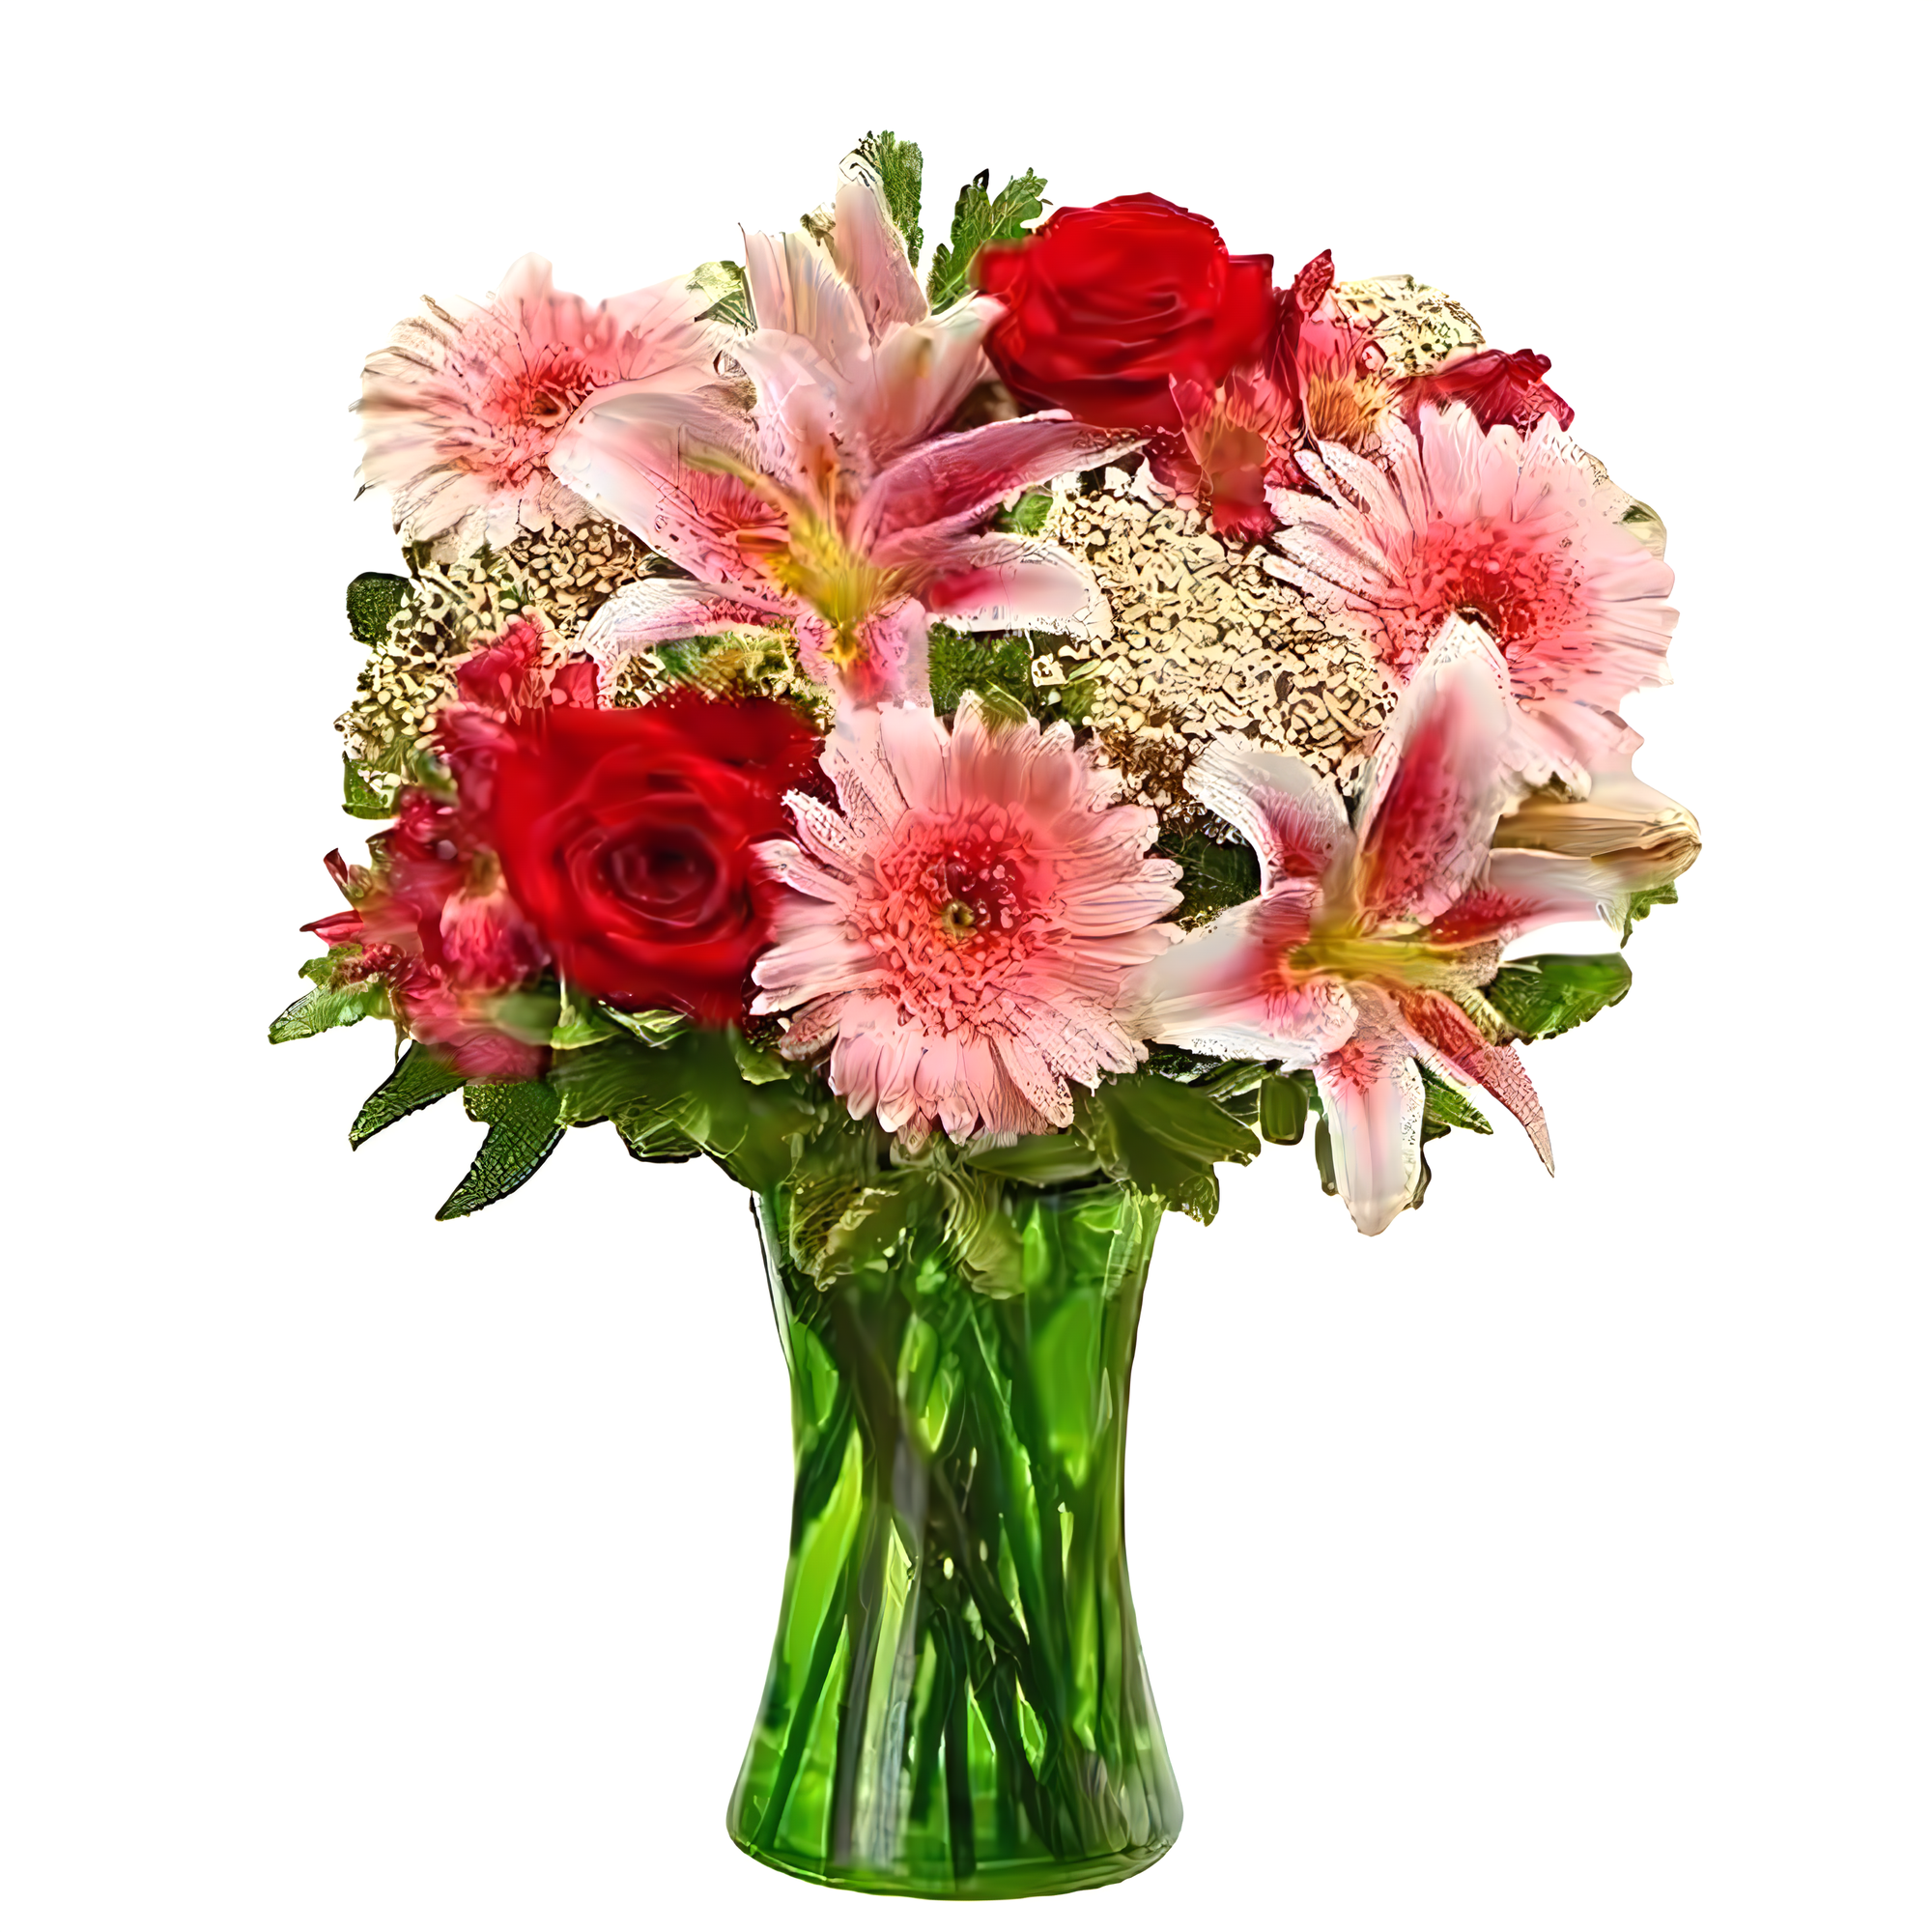 Manhattan Flower Delivery - Sympathy Sentiments Bouquet - Funeral > For the Home